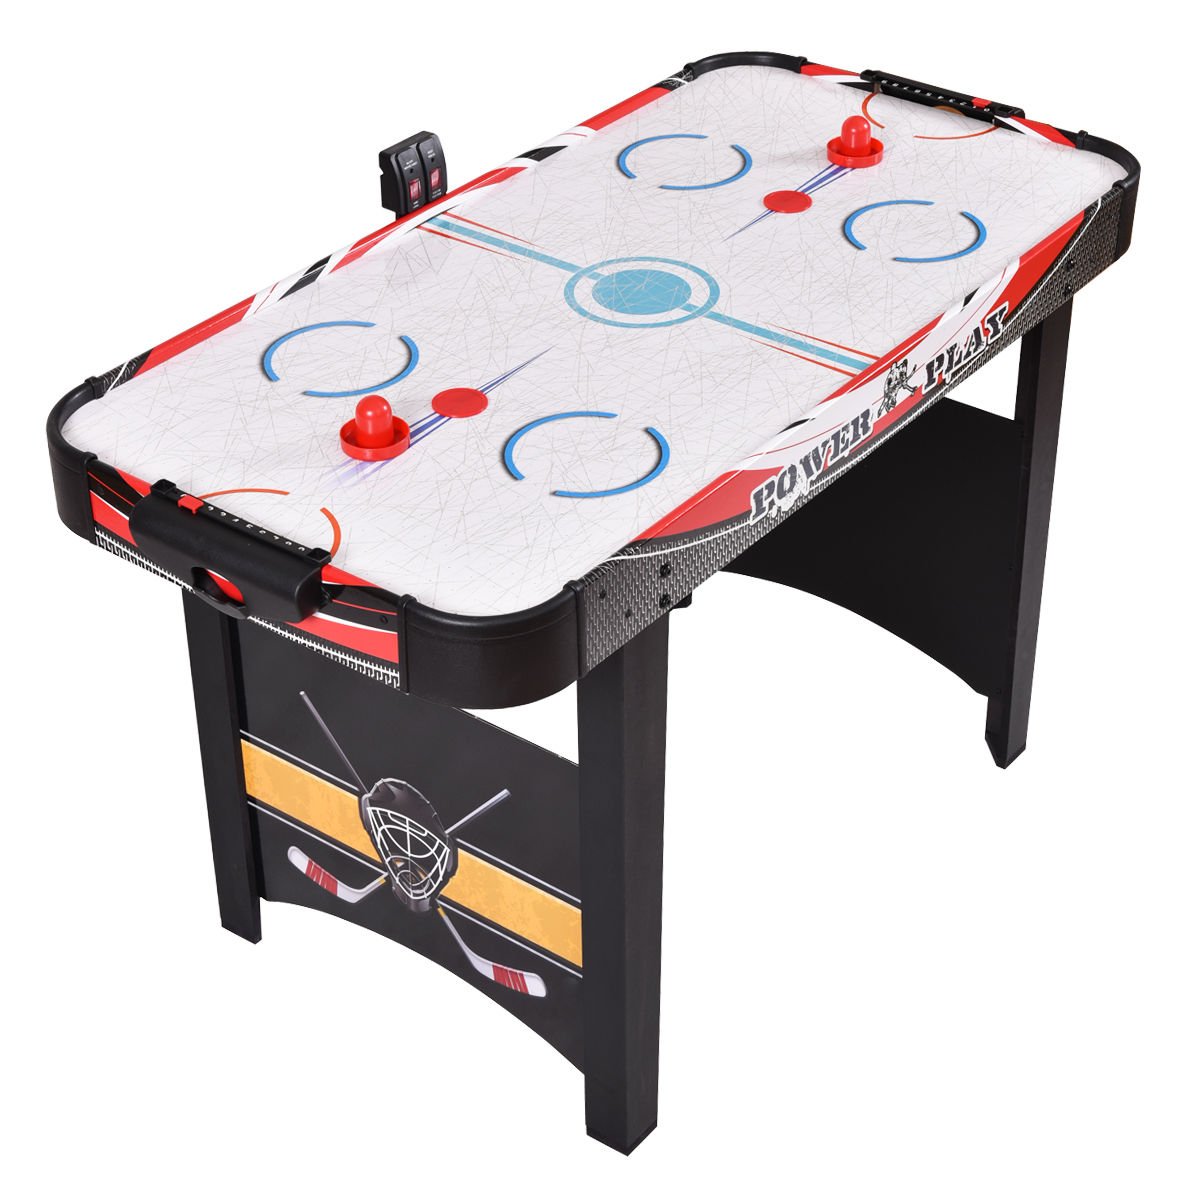 GOPLUS 48" Air Powered Hockey Table Indoor Sports Game Electronic Scoring Red Puck for Kids